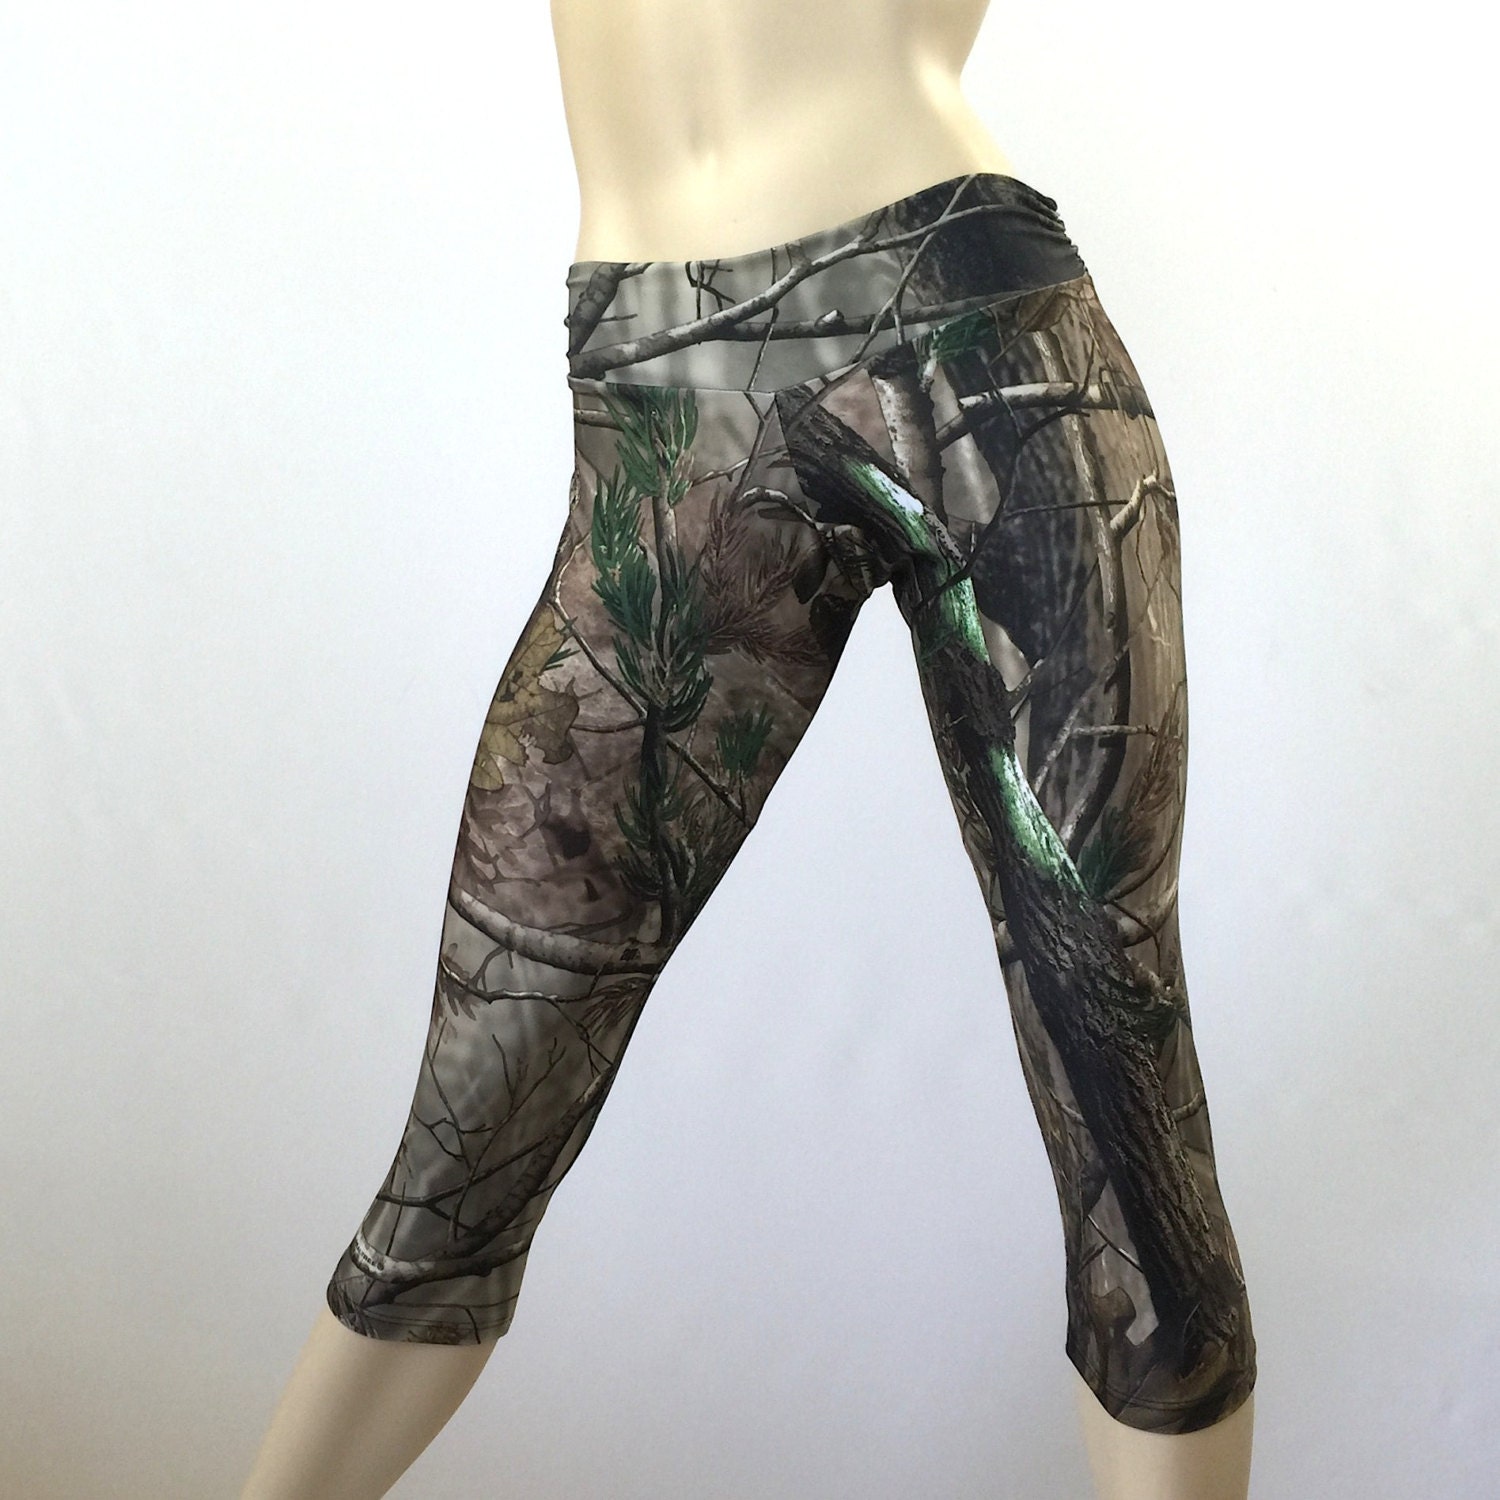 Simple Camo workout pants for Burn Fat fast